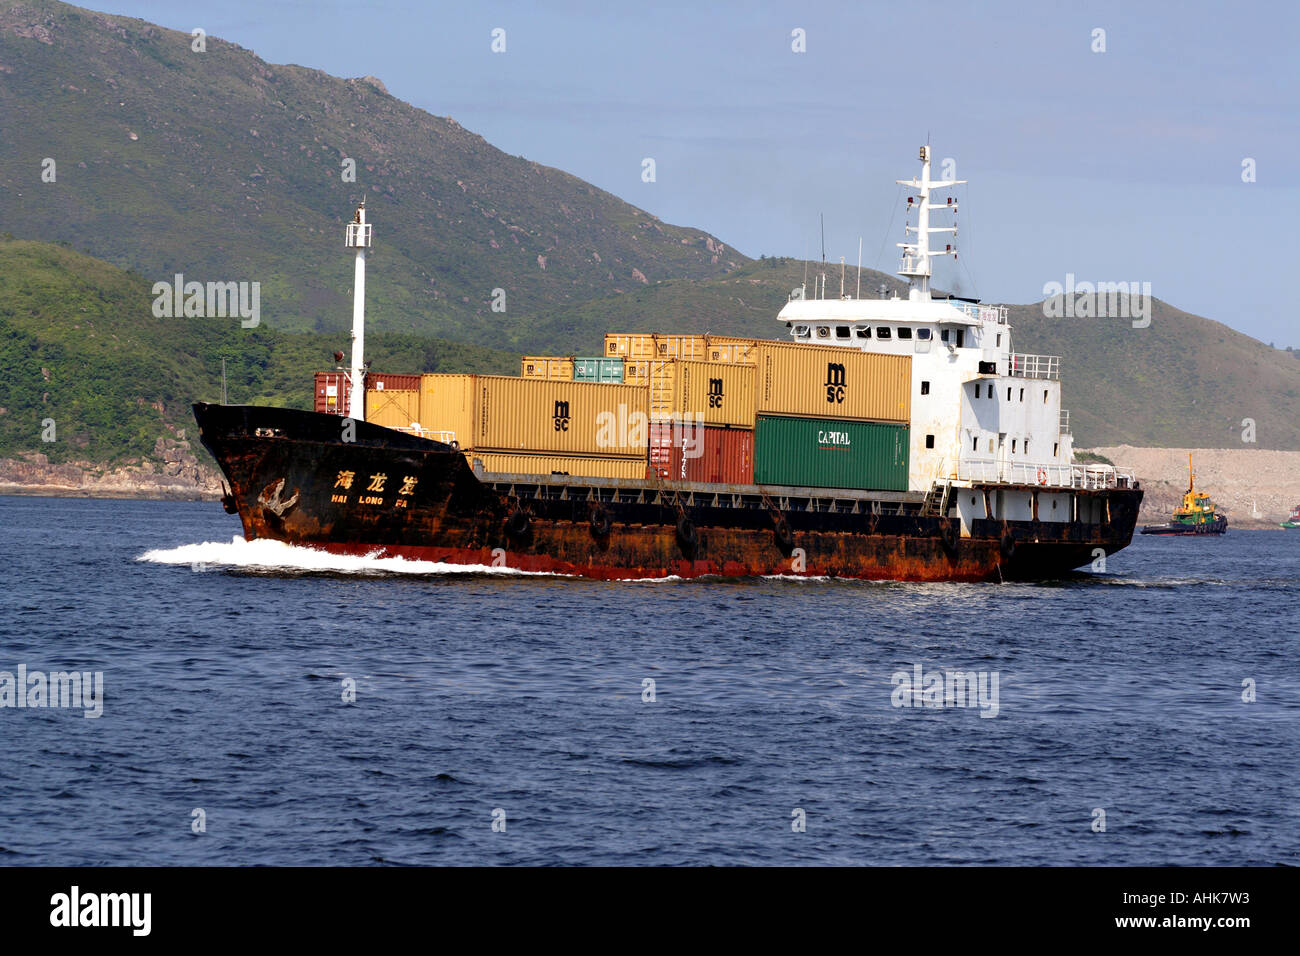 Cargo Ship Freighter Loaded With Shipping Containers, Hong Kong, China Stock Photo